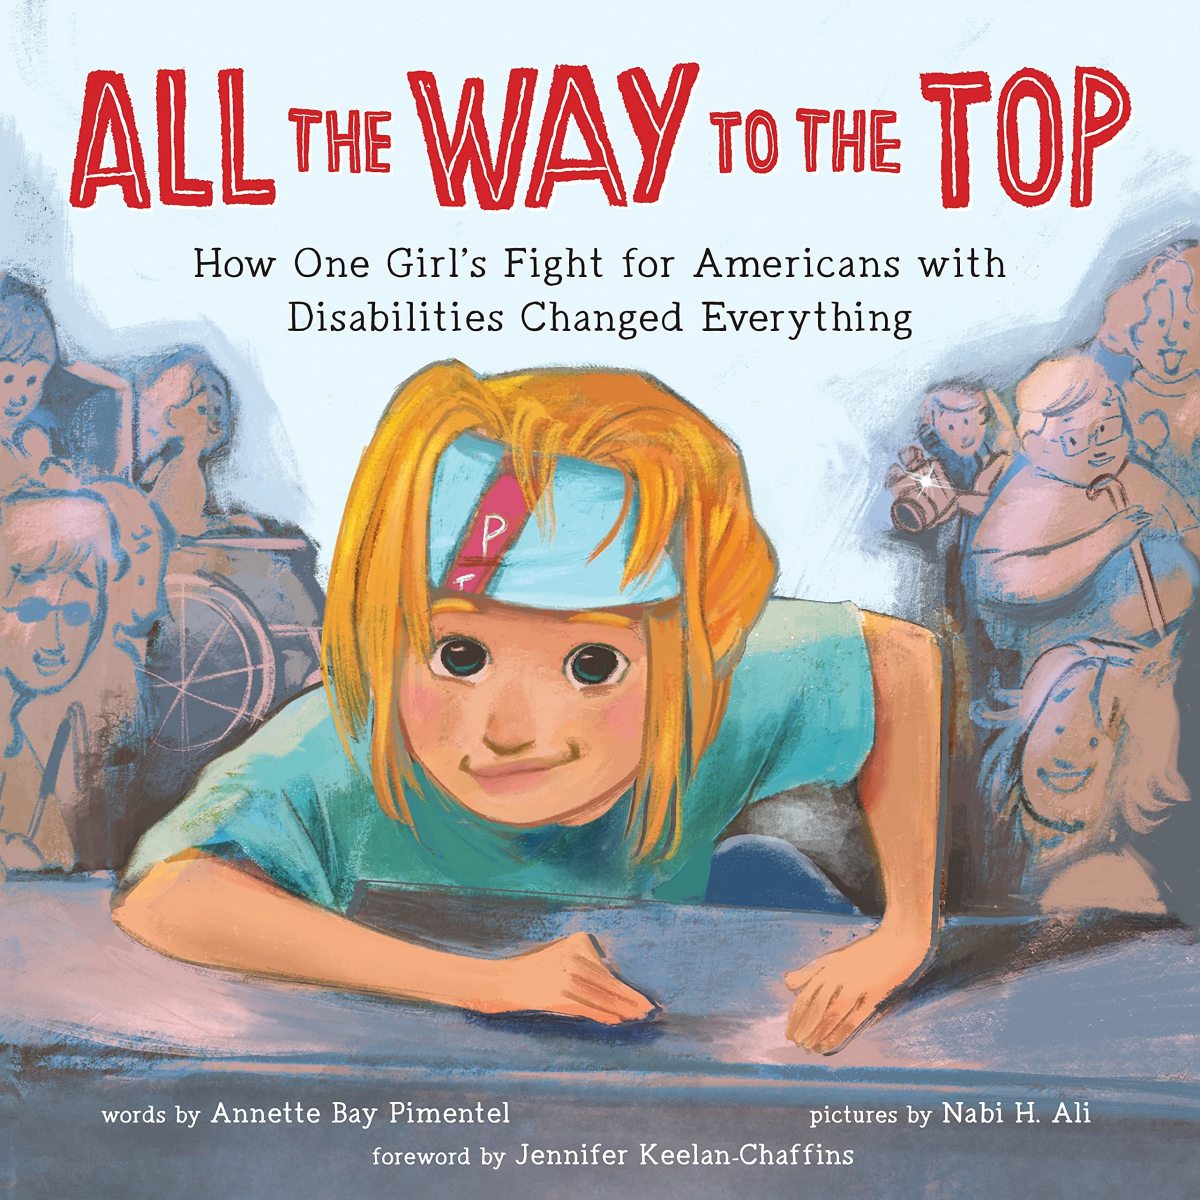 All the Way to the Top: How One Girl’s Fight for the Americans With Disabilities Act Changed Everything by Annette Bay Pimentel